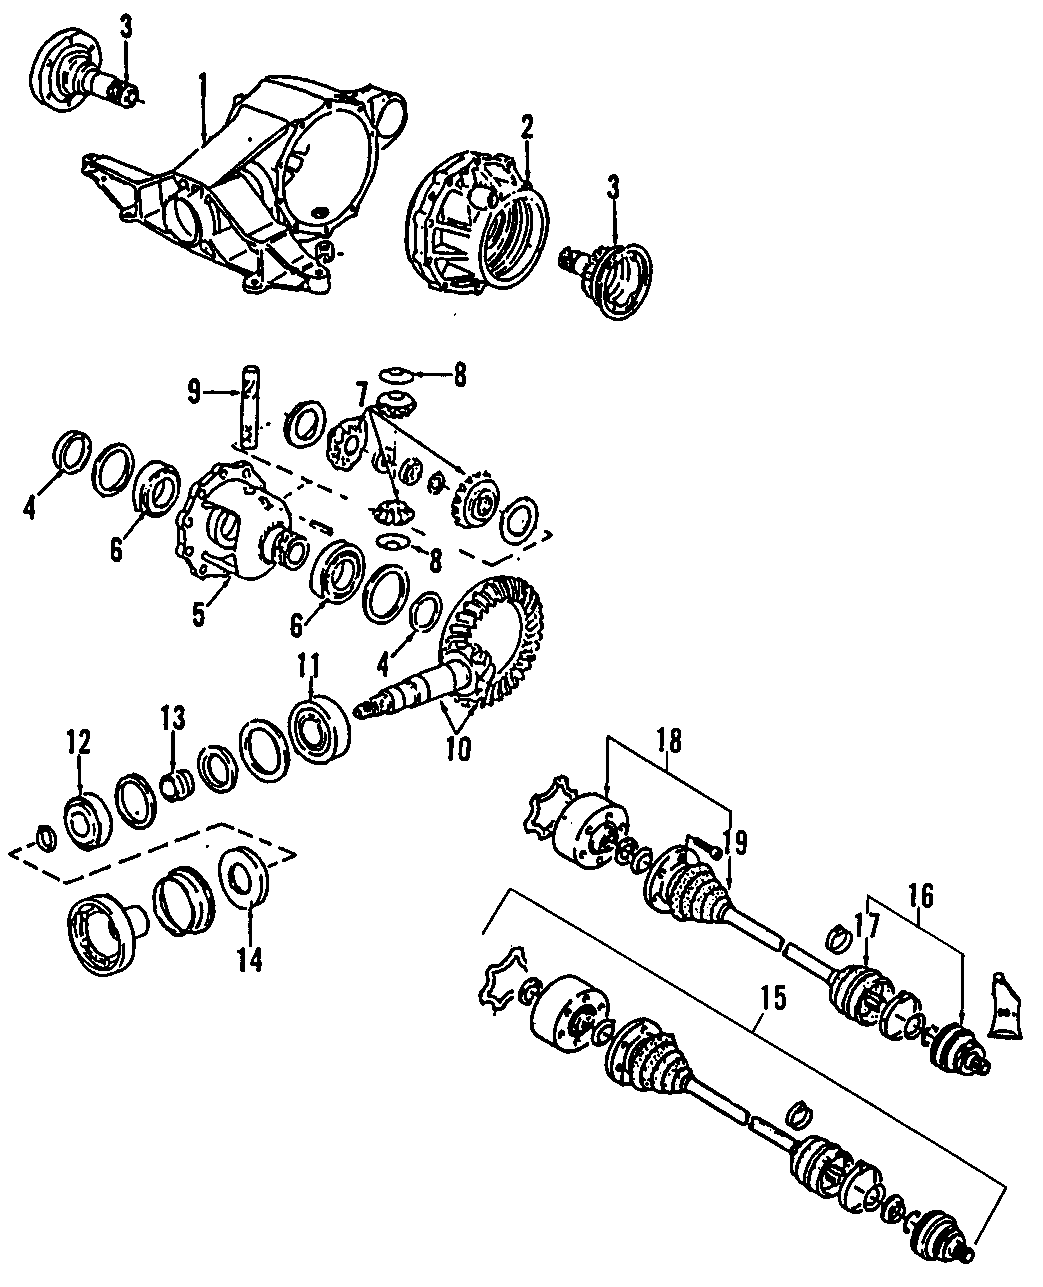 9DRIVE AXLES. REAR AXLE. AXLE SHAFTS & JOINTS. DIFFERENTIAL. PROPELLER SHAFT.https://images.simplepart.com/images/parts/motor/fullsize/F207090.png